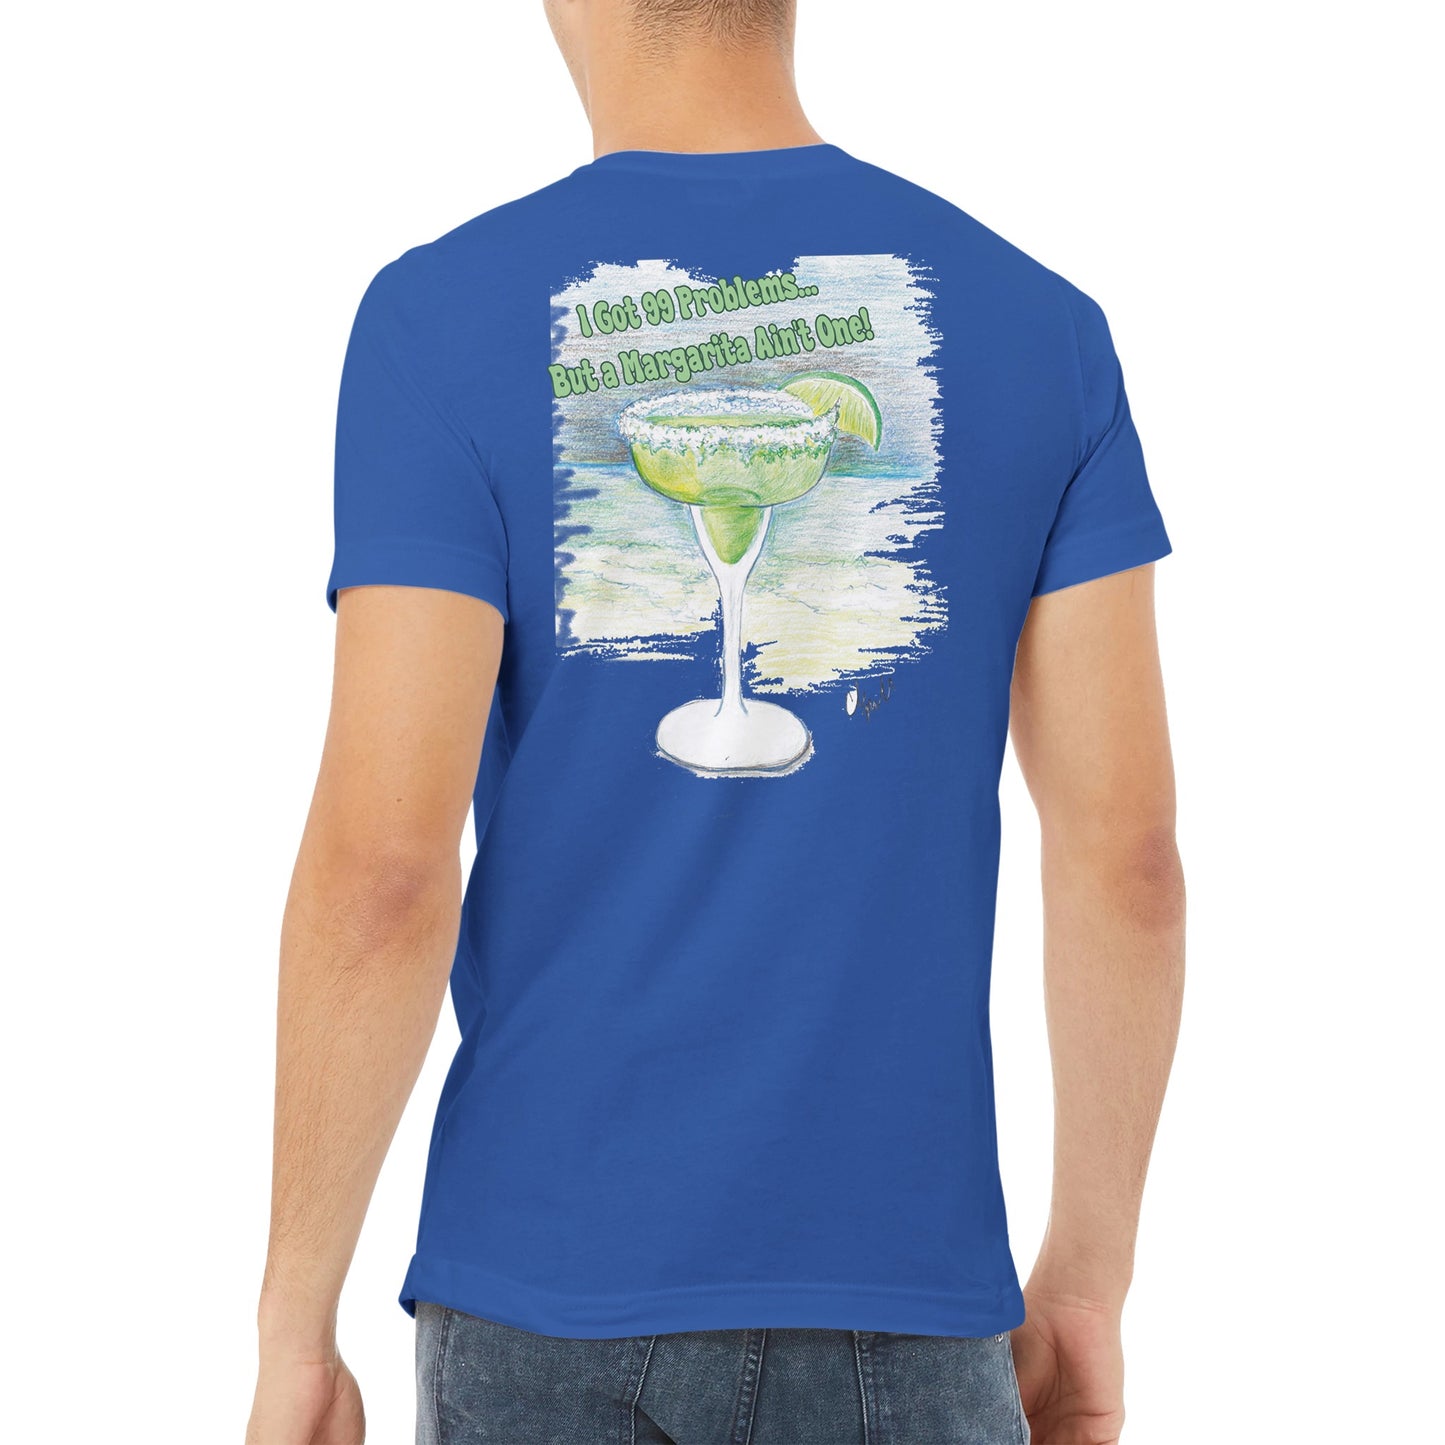 A true royal blue premium unisex v-neck t-shirt with original artwork and motto I Got 99 Problems But a Margarita Aint One on back and WhatYa Say logo on front made with combed and ring-spun cotton from WhatYa Say Apparel worn by A brown-haired male back view.